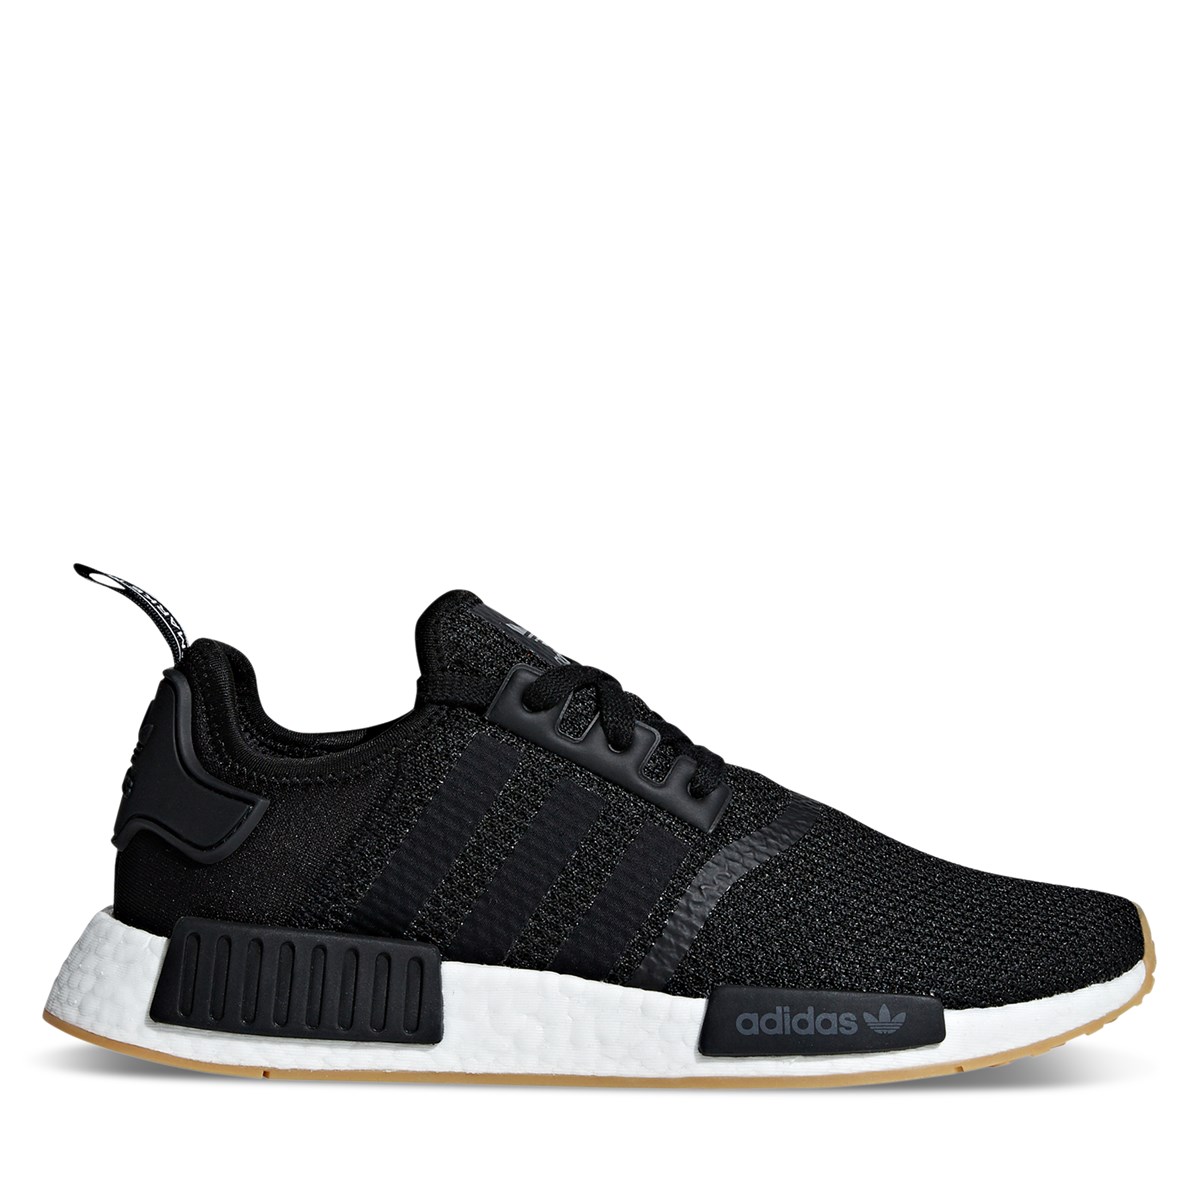 nmd_r1 shoes near me